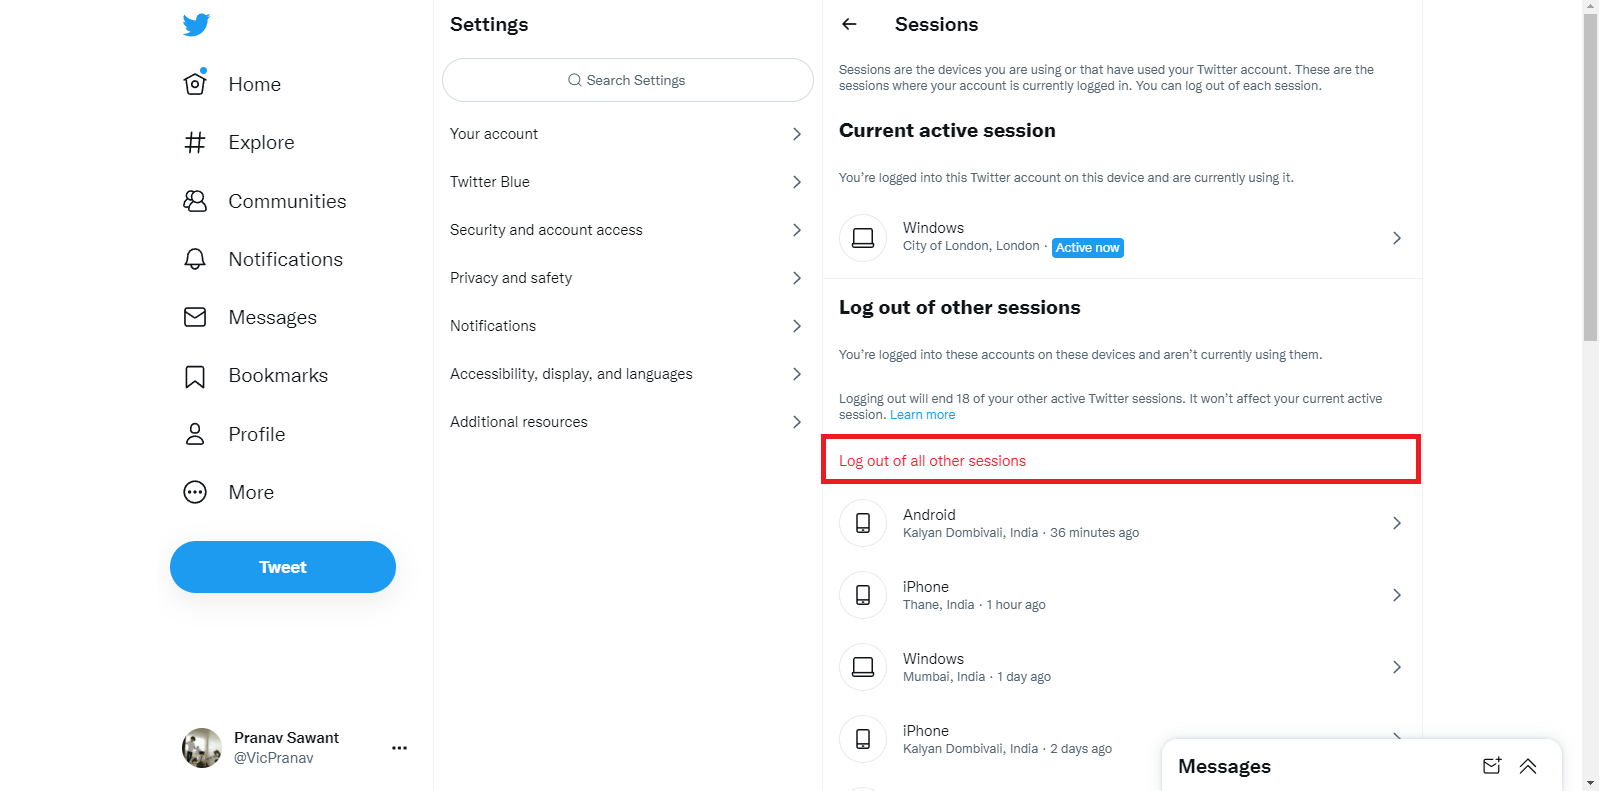 Click on Log out of all other sessions